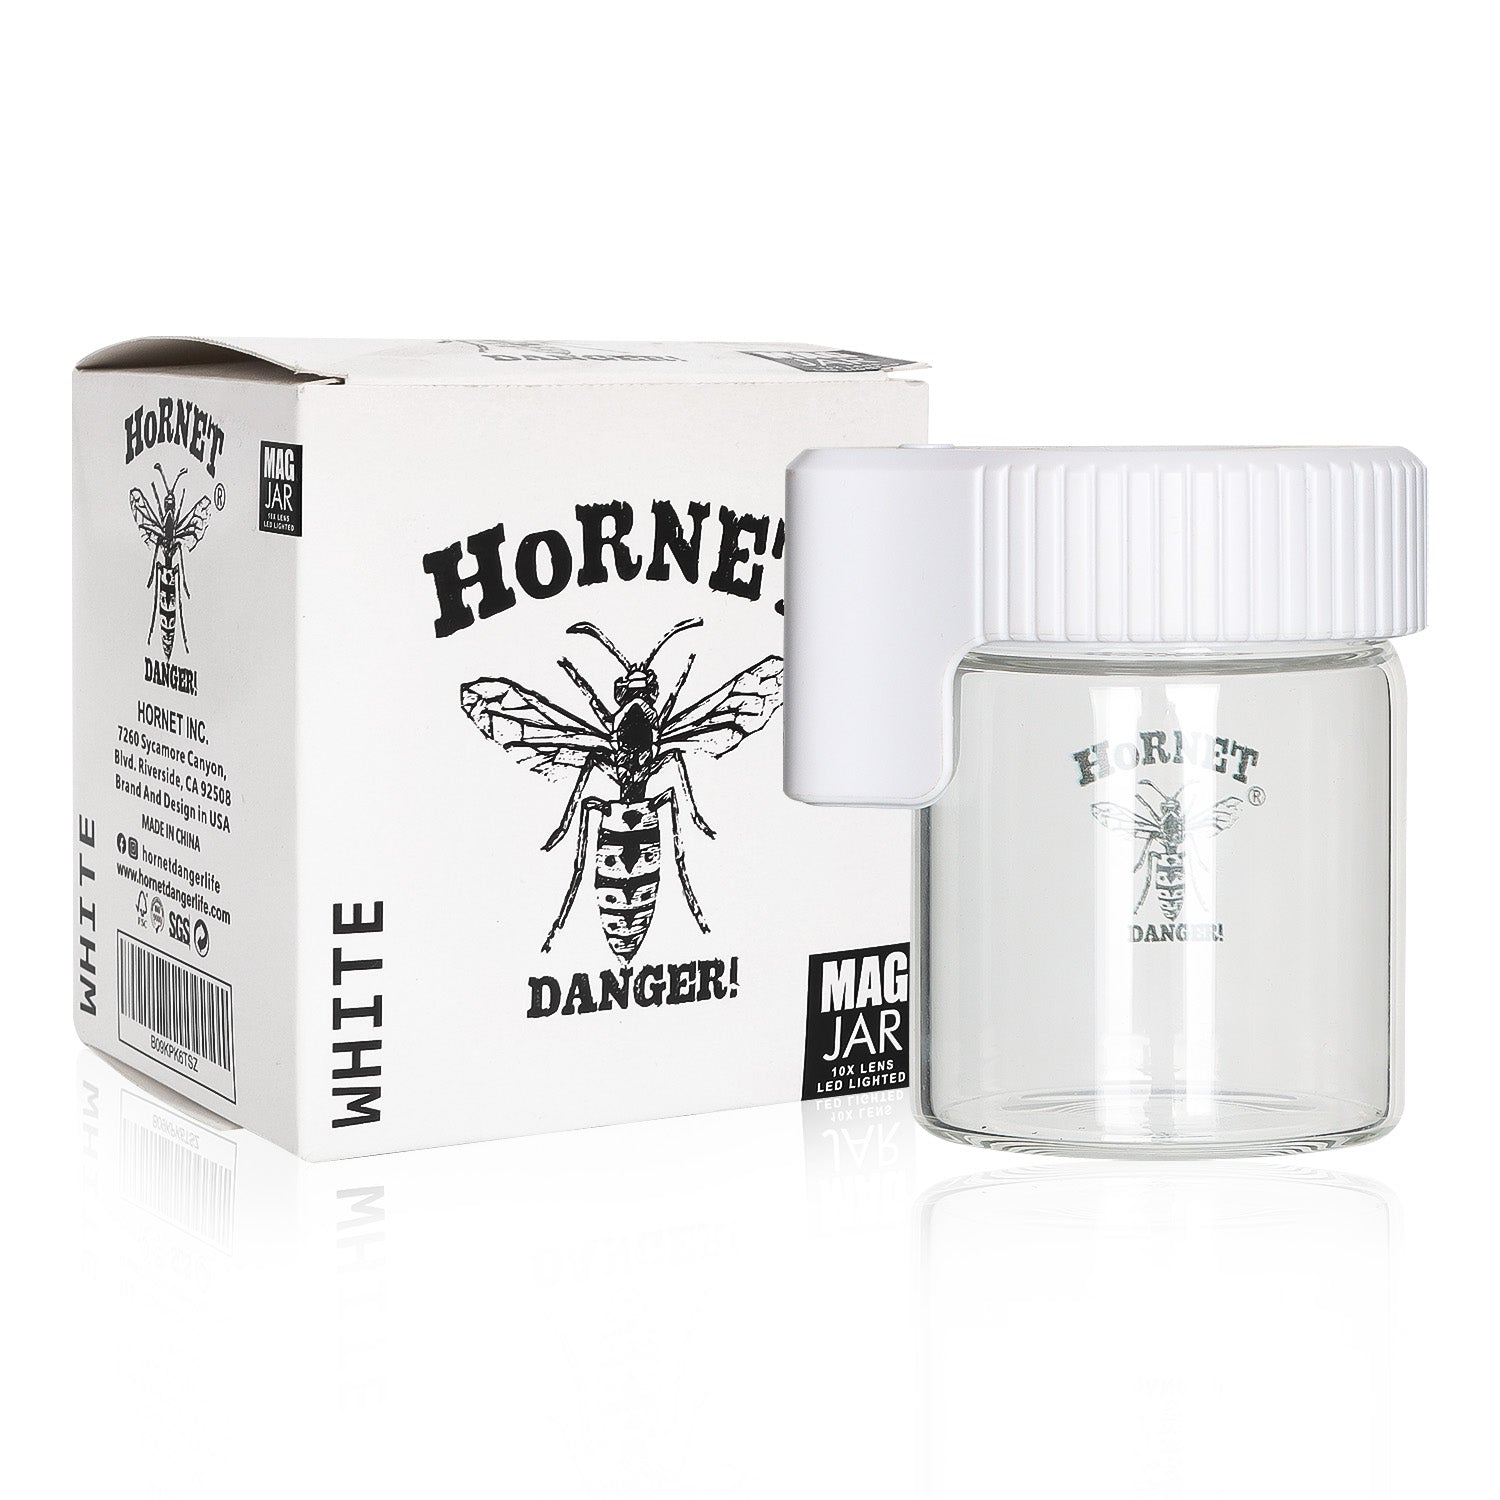 HORNET Light-Up Led Glass Storage Jar, Air Tight & Magnifying View Jar, White Color Jar Lid, Rechargeable Glass Jar